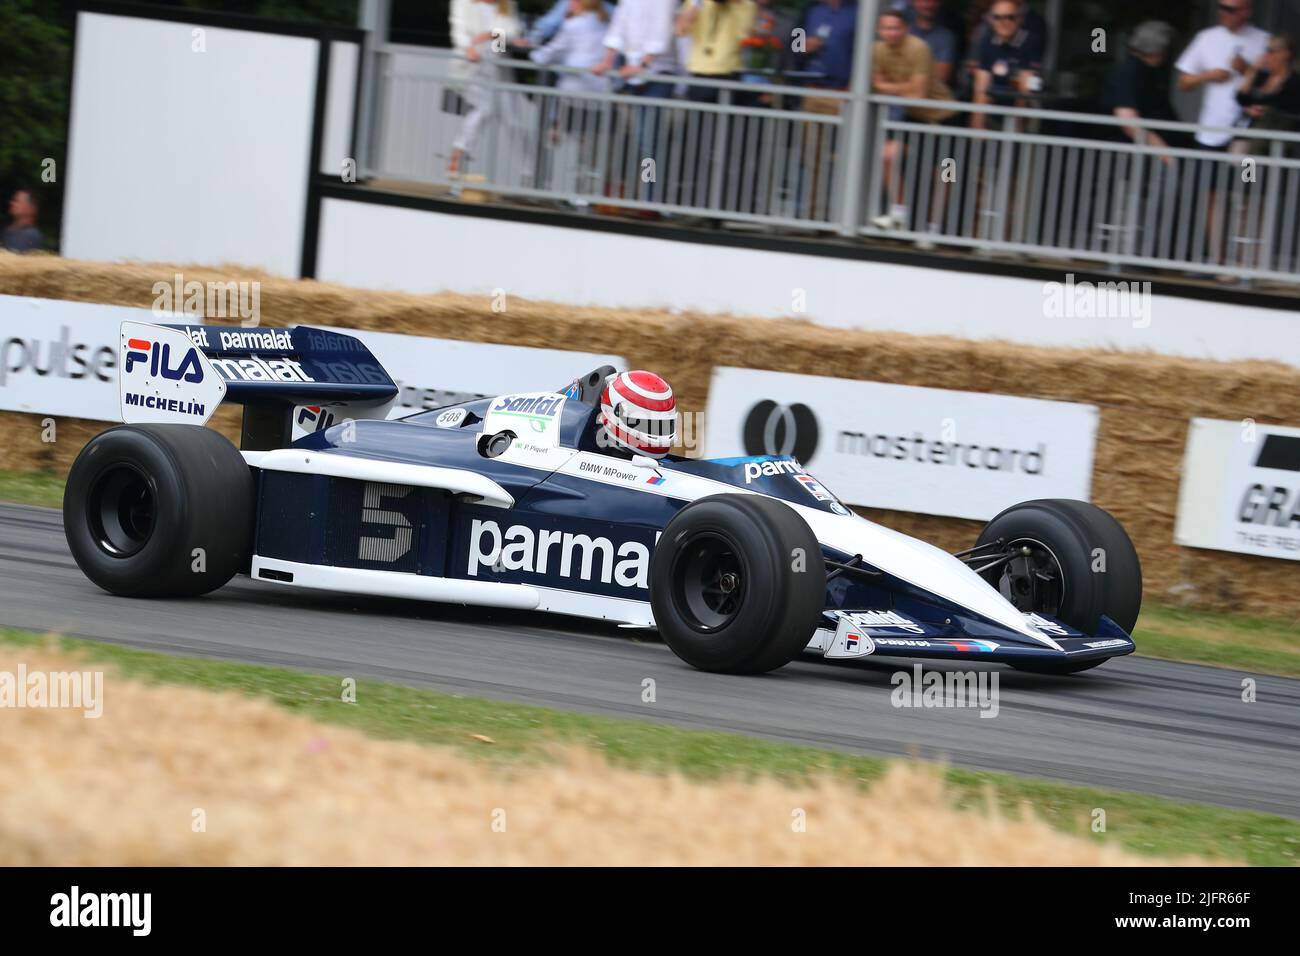 Brabham BMW BT52 racing car at the Festival of Speed 2022 at